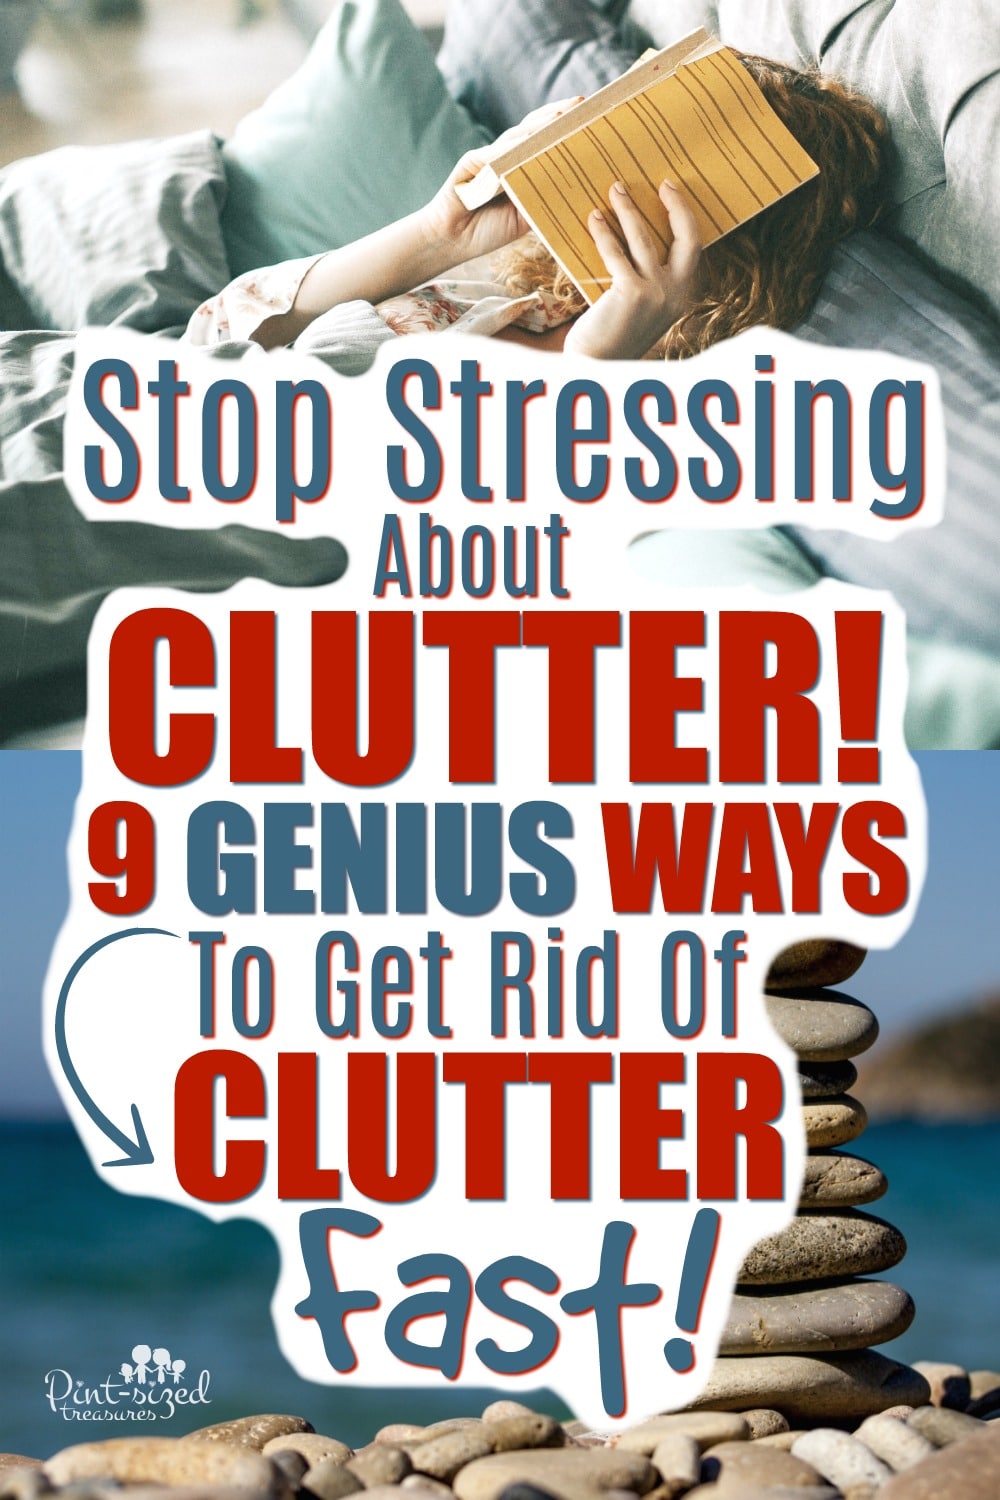 Tips to get rid of clutter